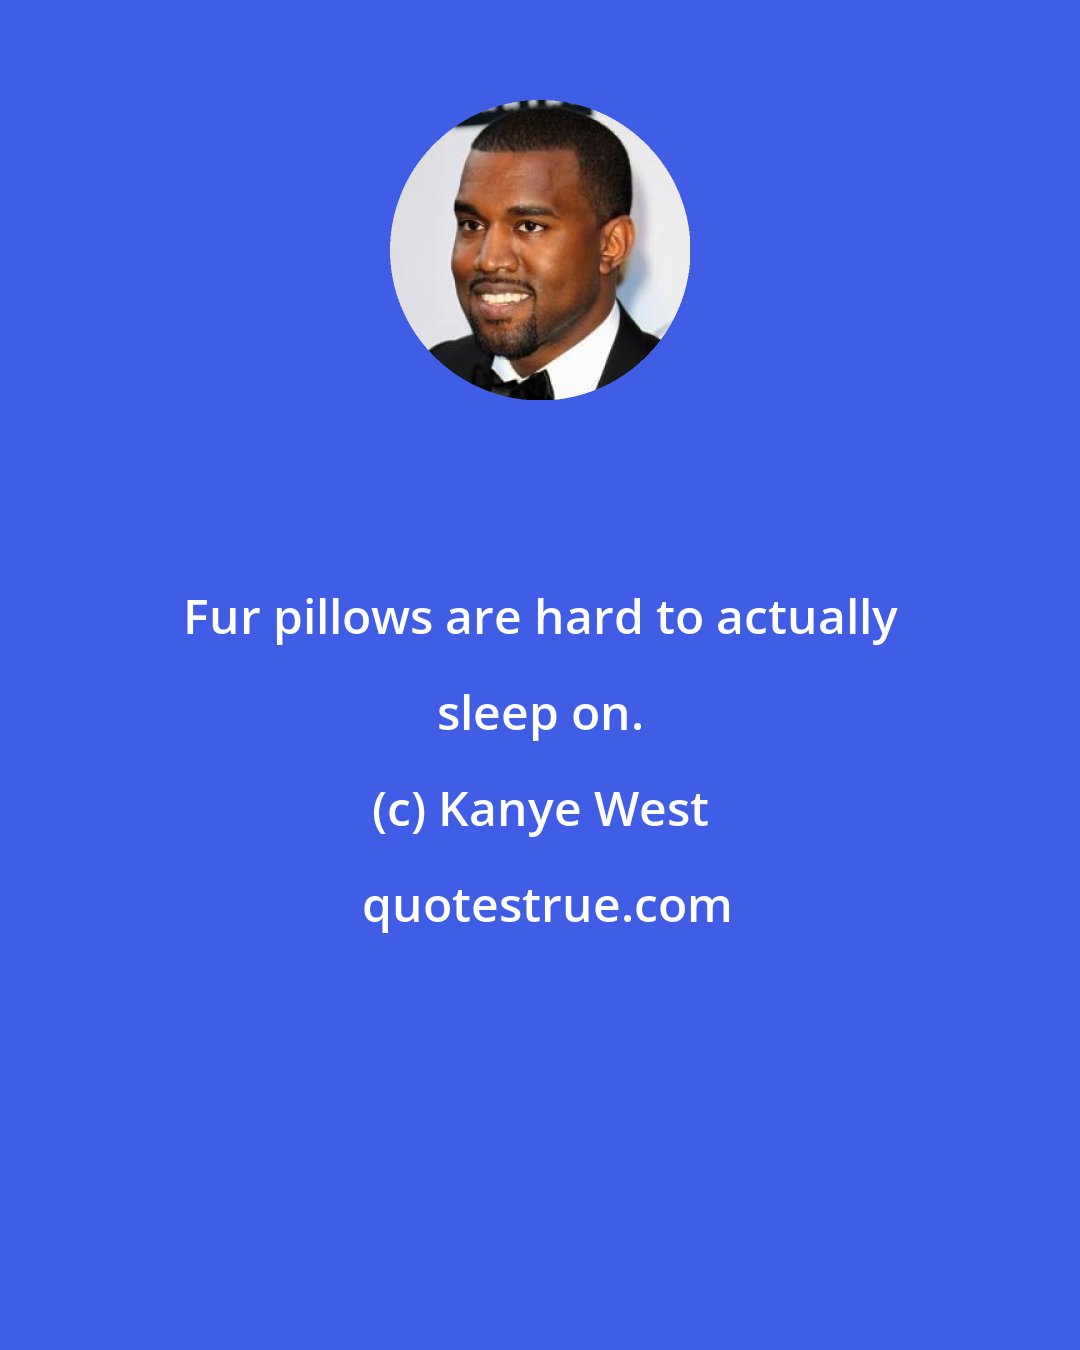 Kanye West: Fur pillows are hard to actually sleep on.